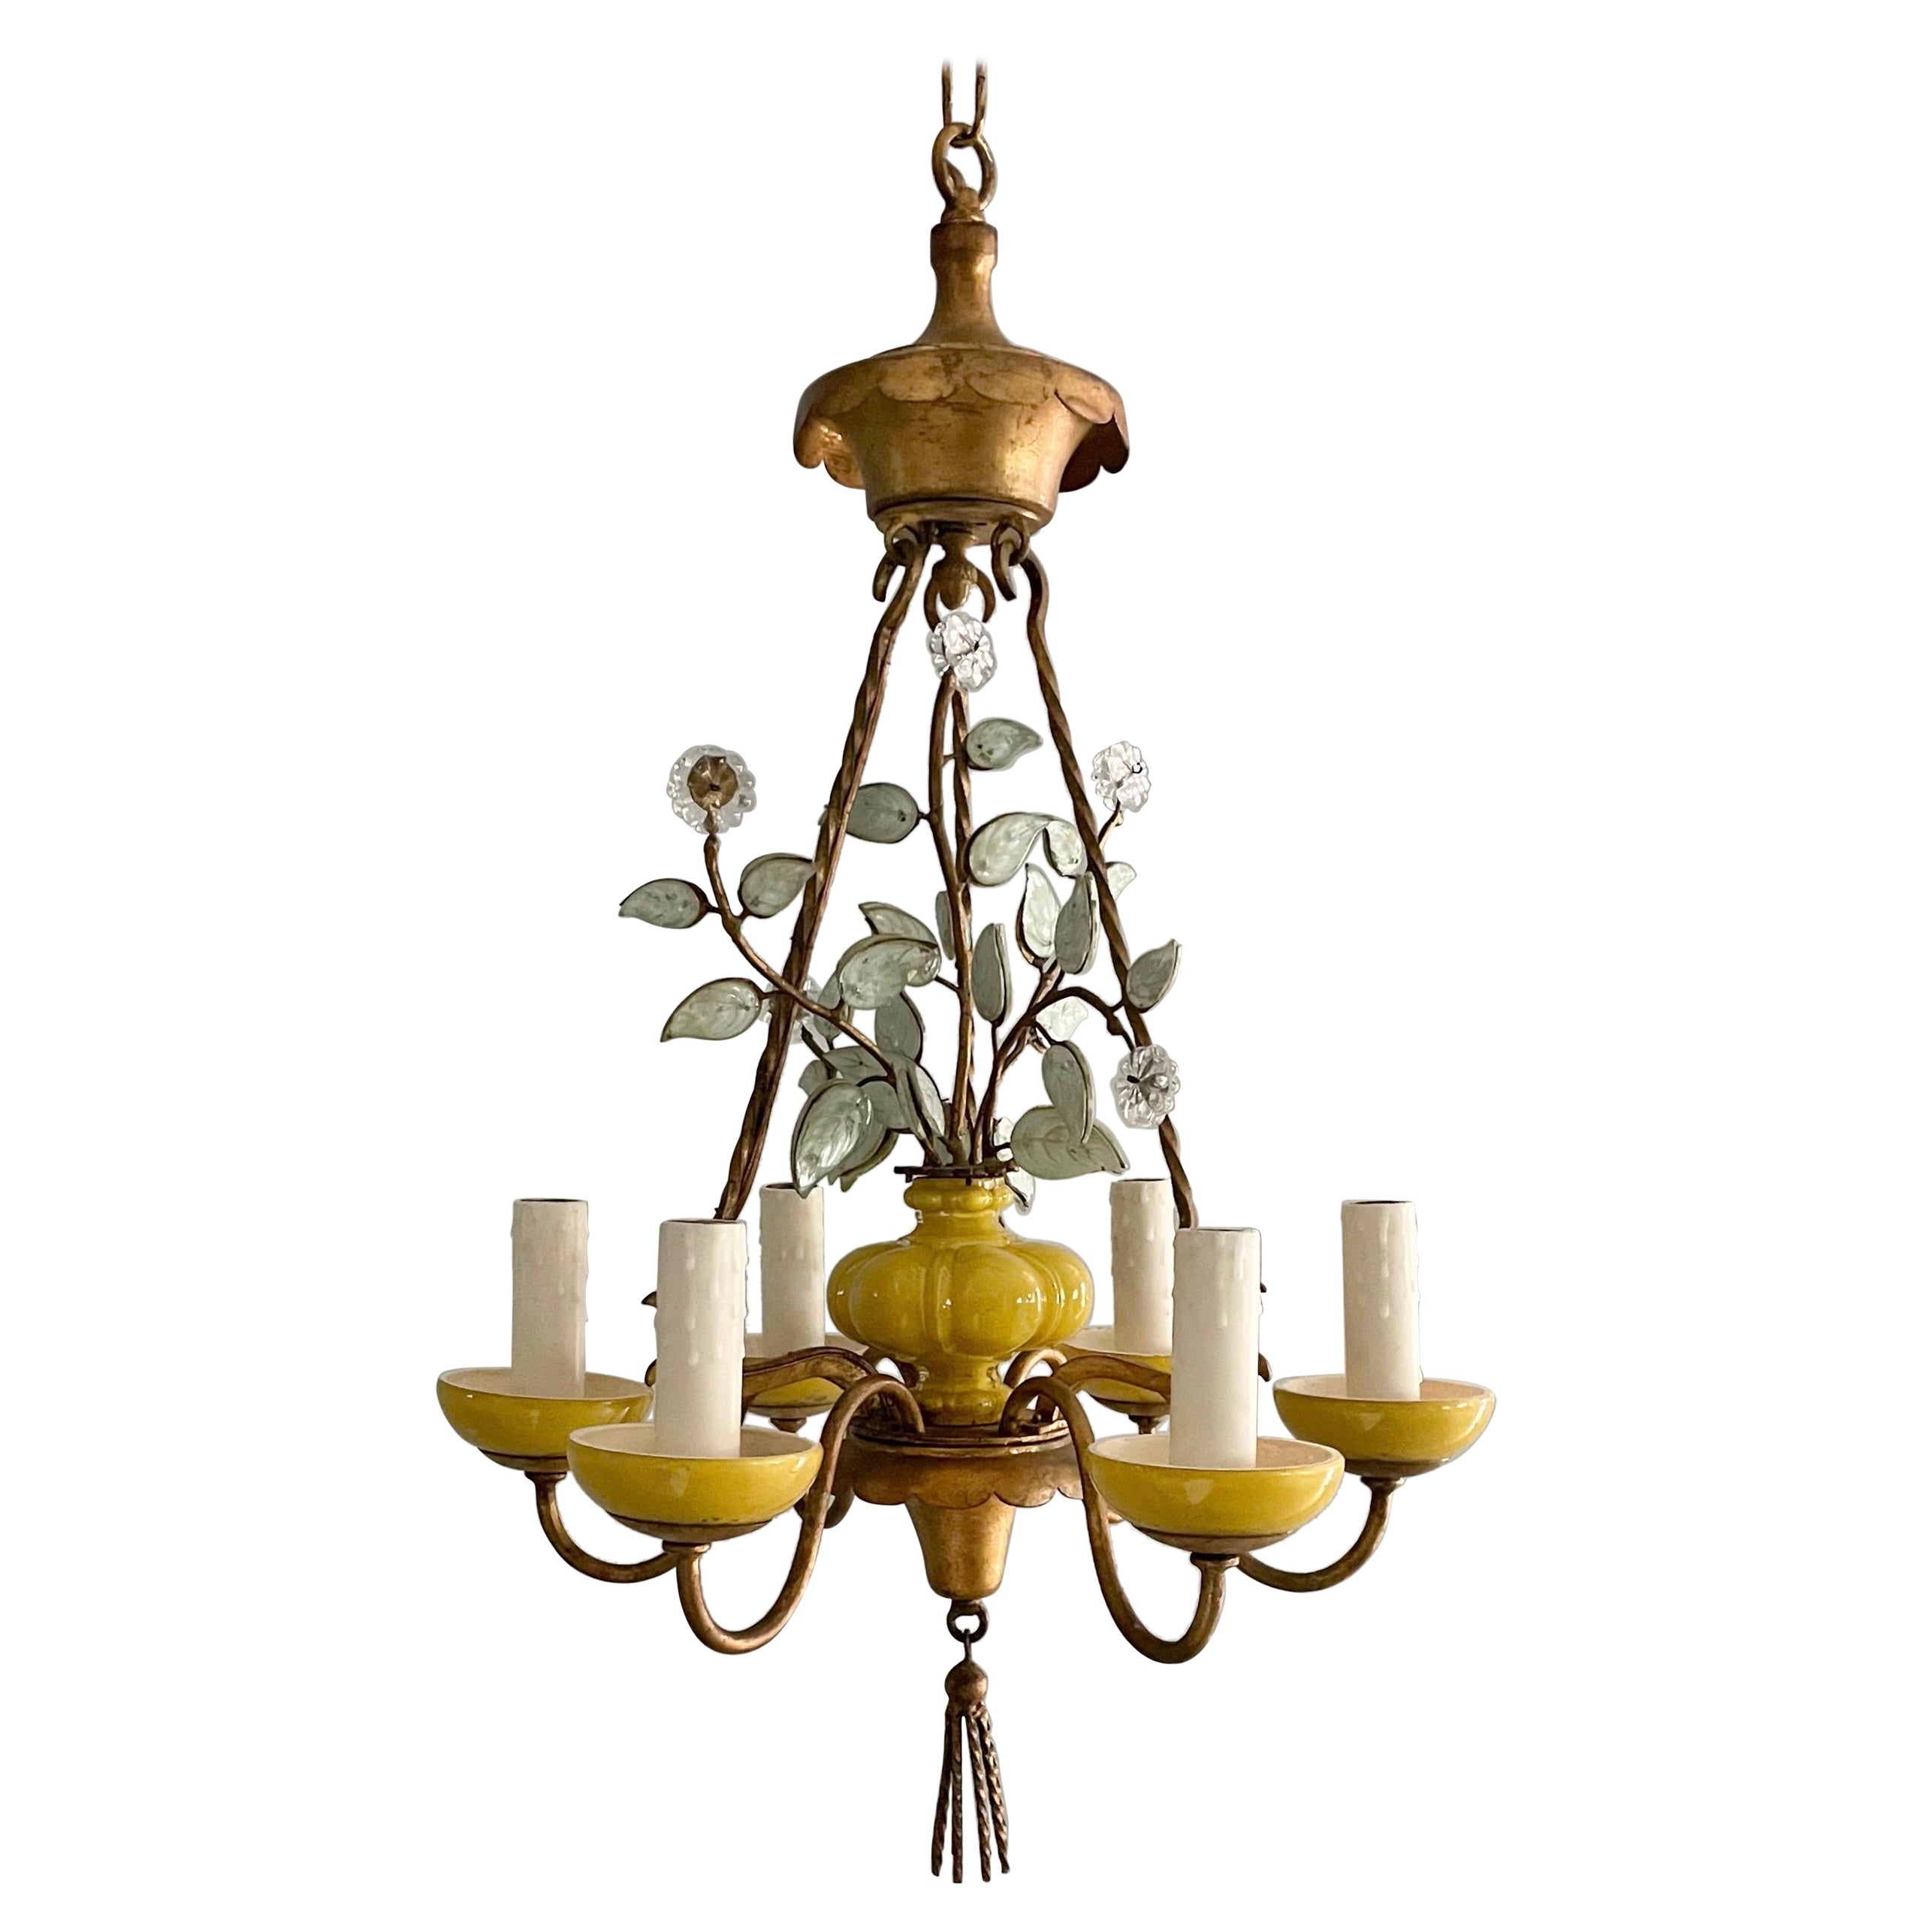 French Bagués-style Chandelier Imported by Paul Ferrante, Los Angeles